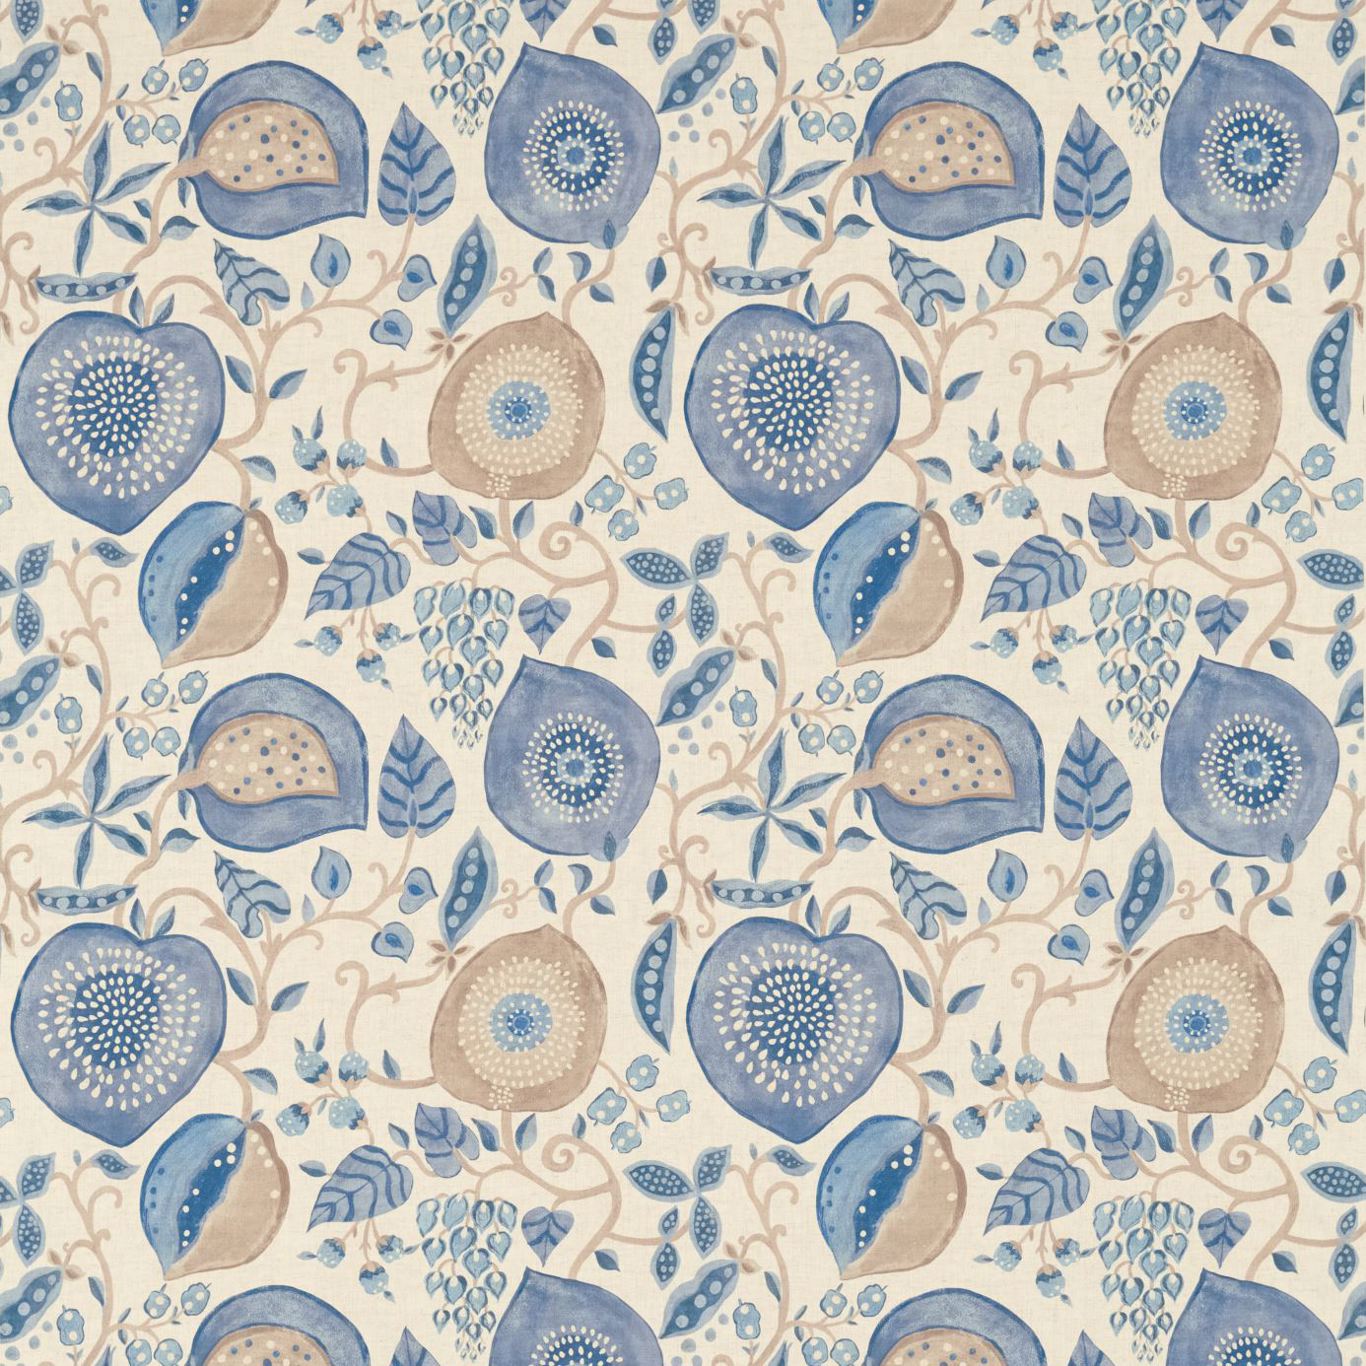 Peas & Pods Fabric by Sanderson